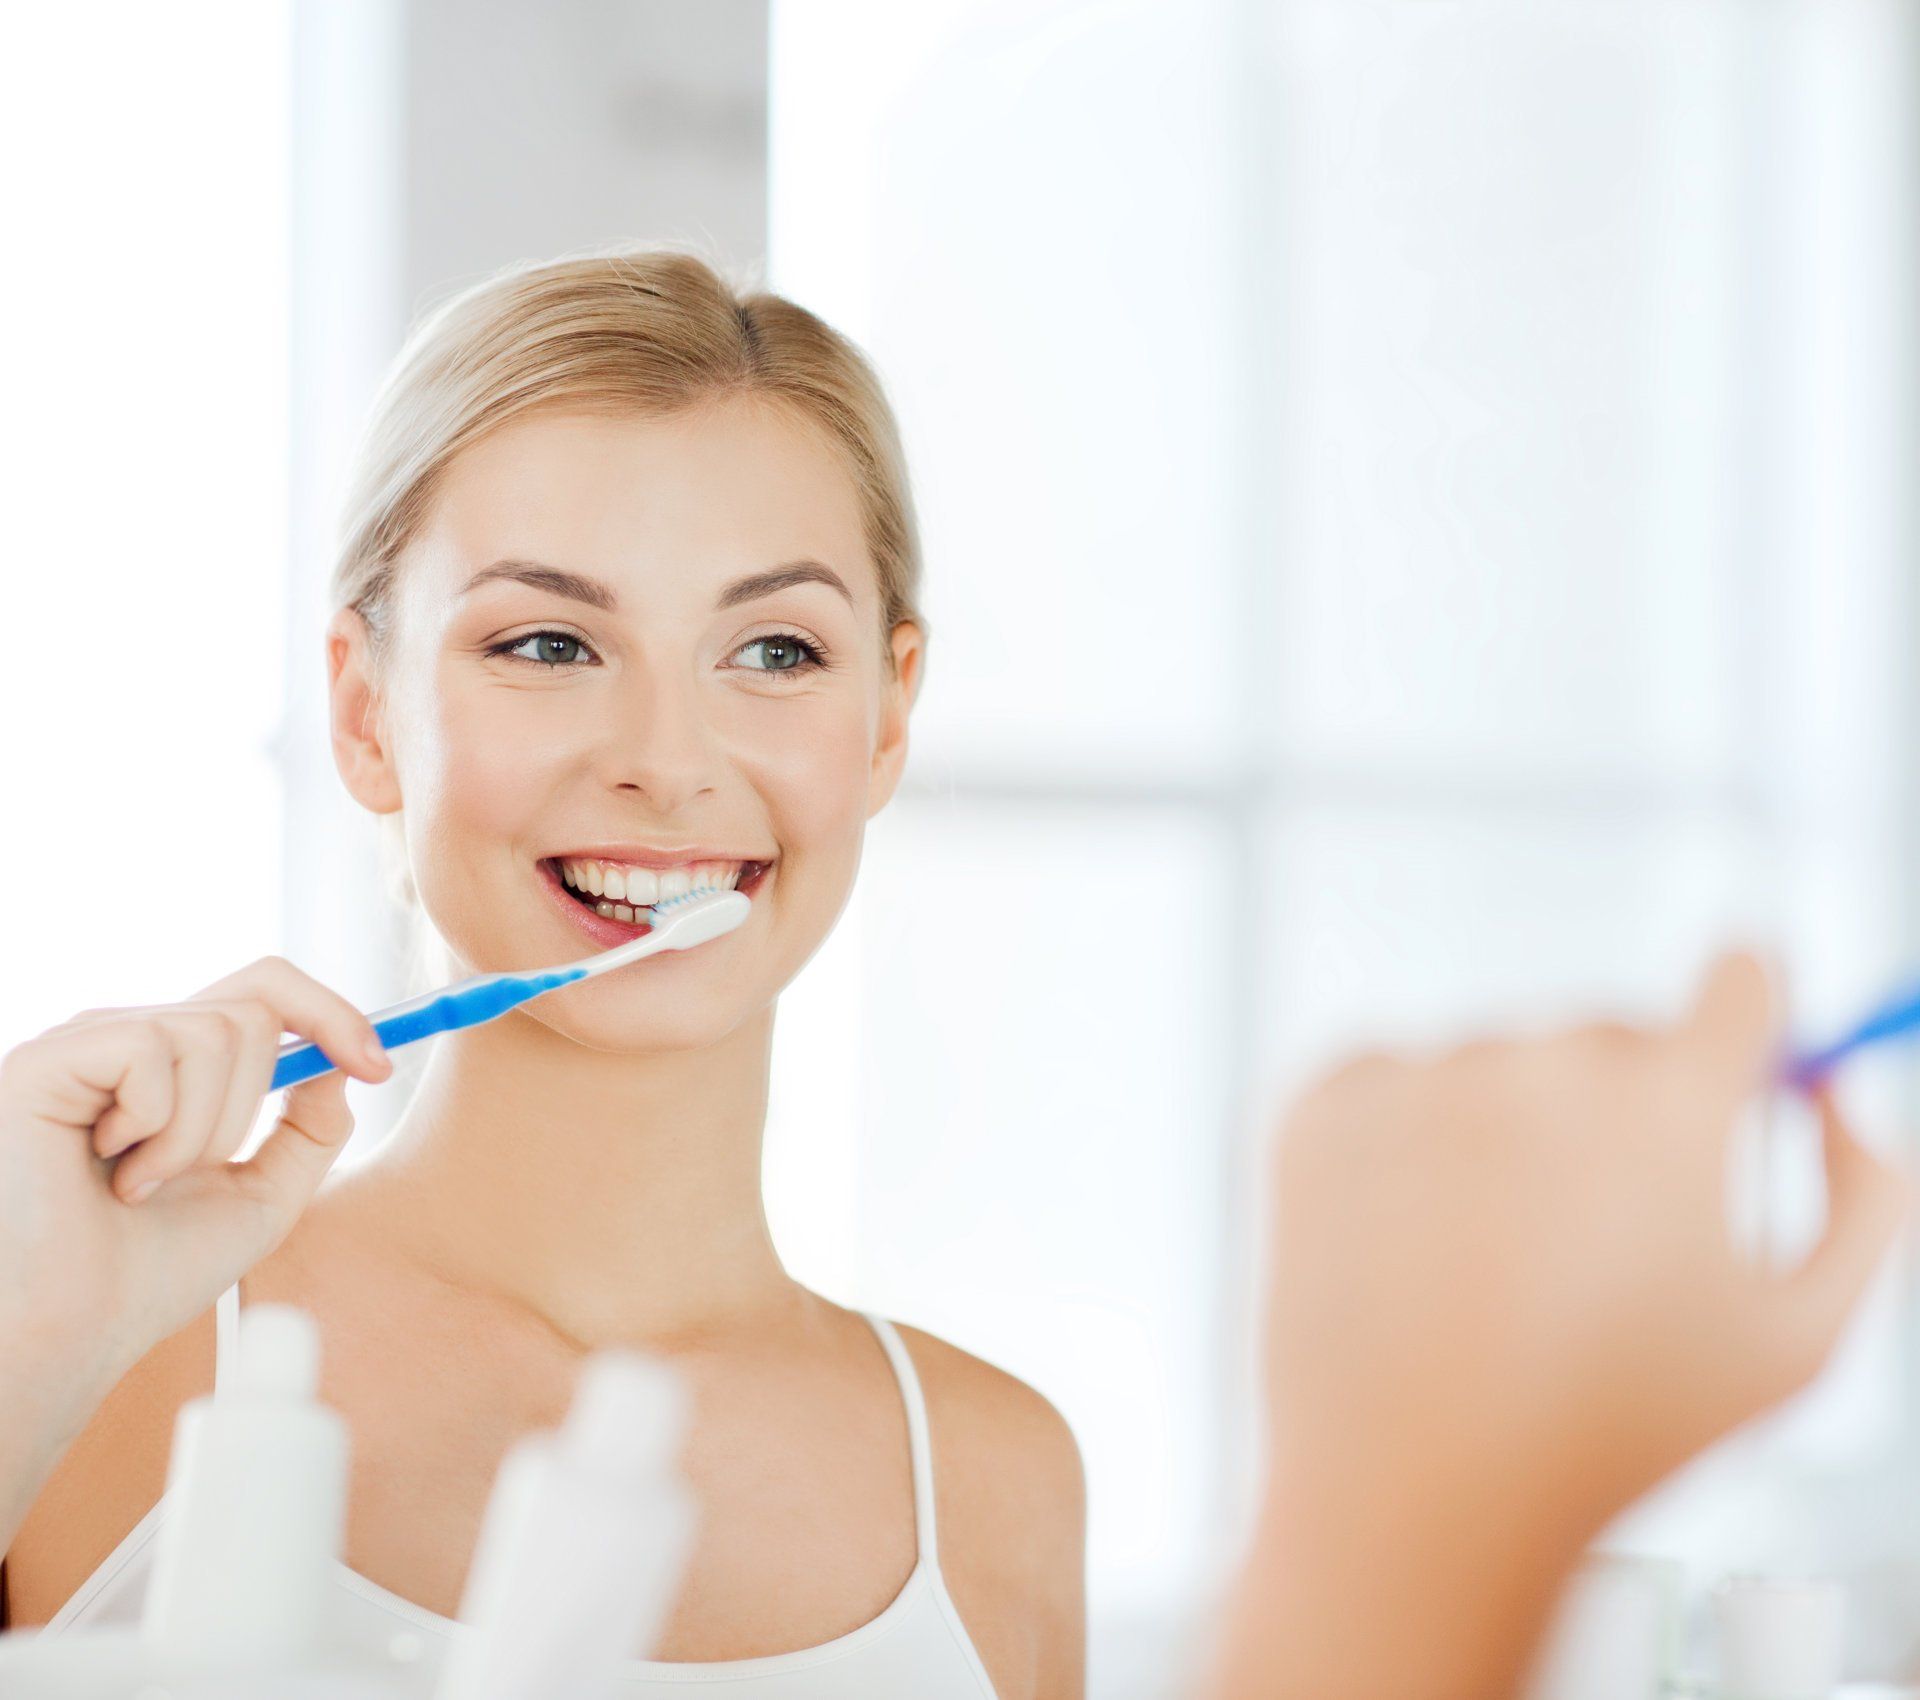 Ellicott City Dentistry - How To Brush Your Teeth